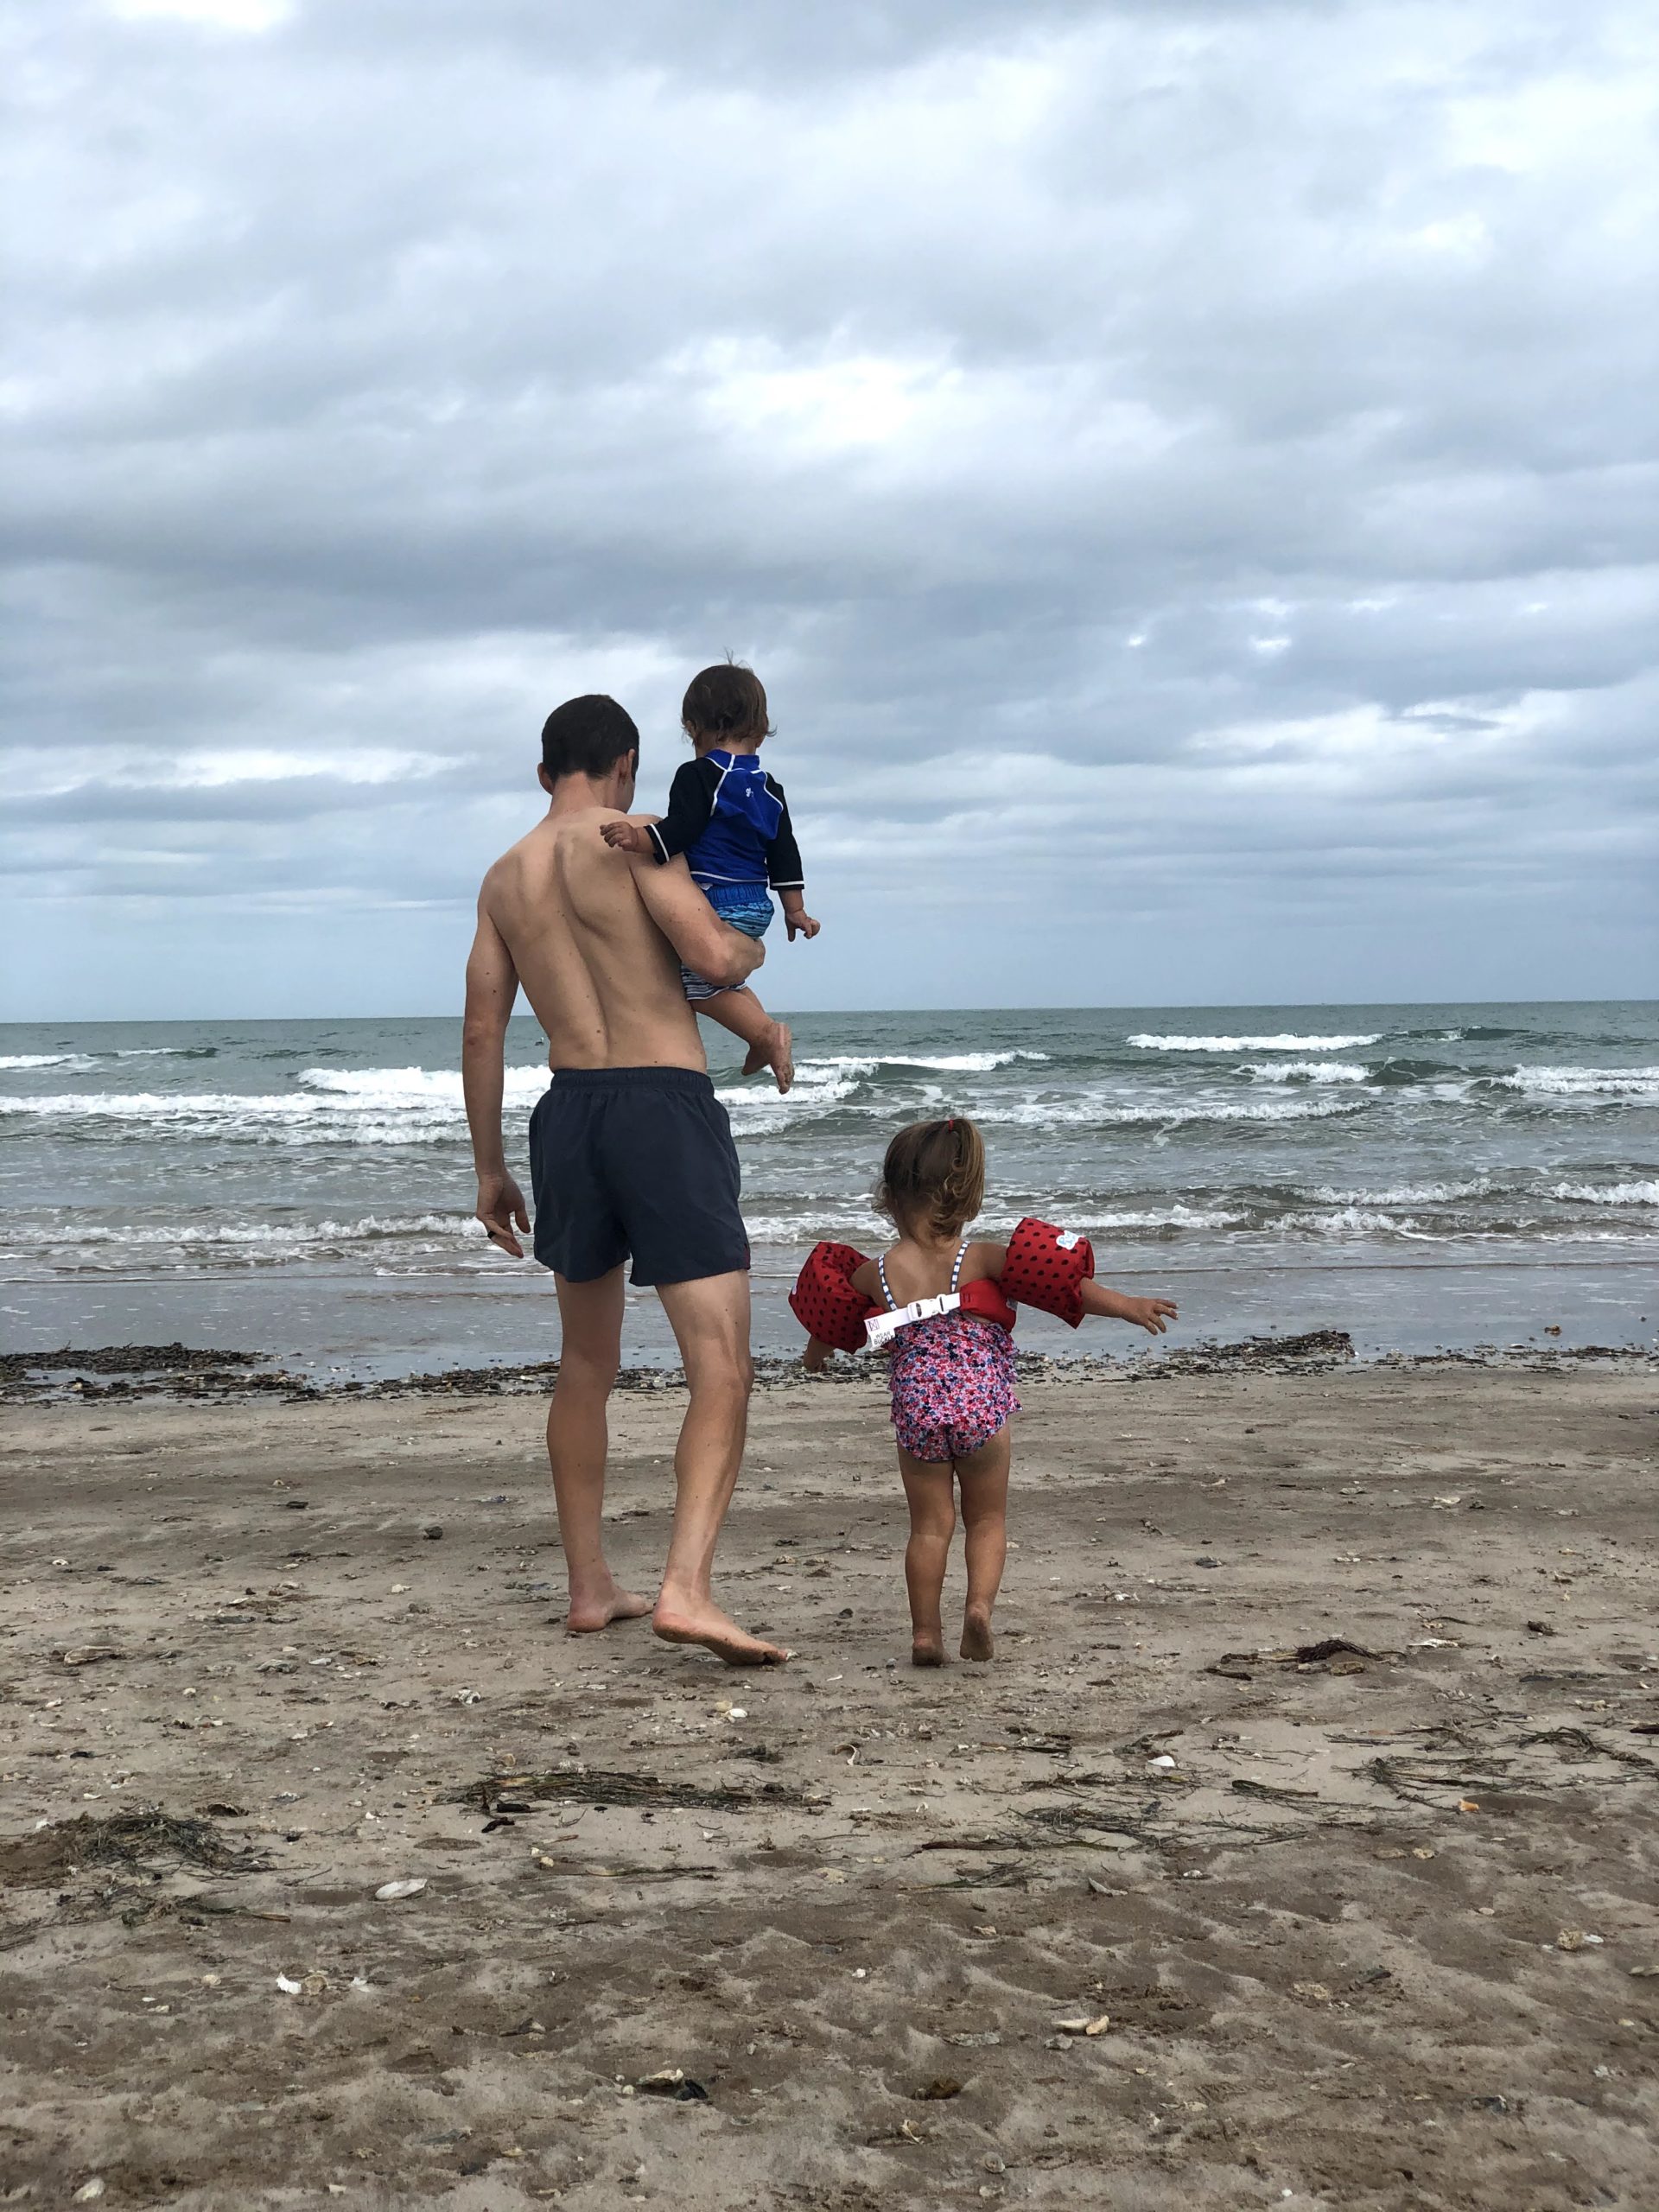 John and the kids at the beach